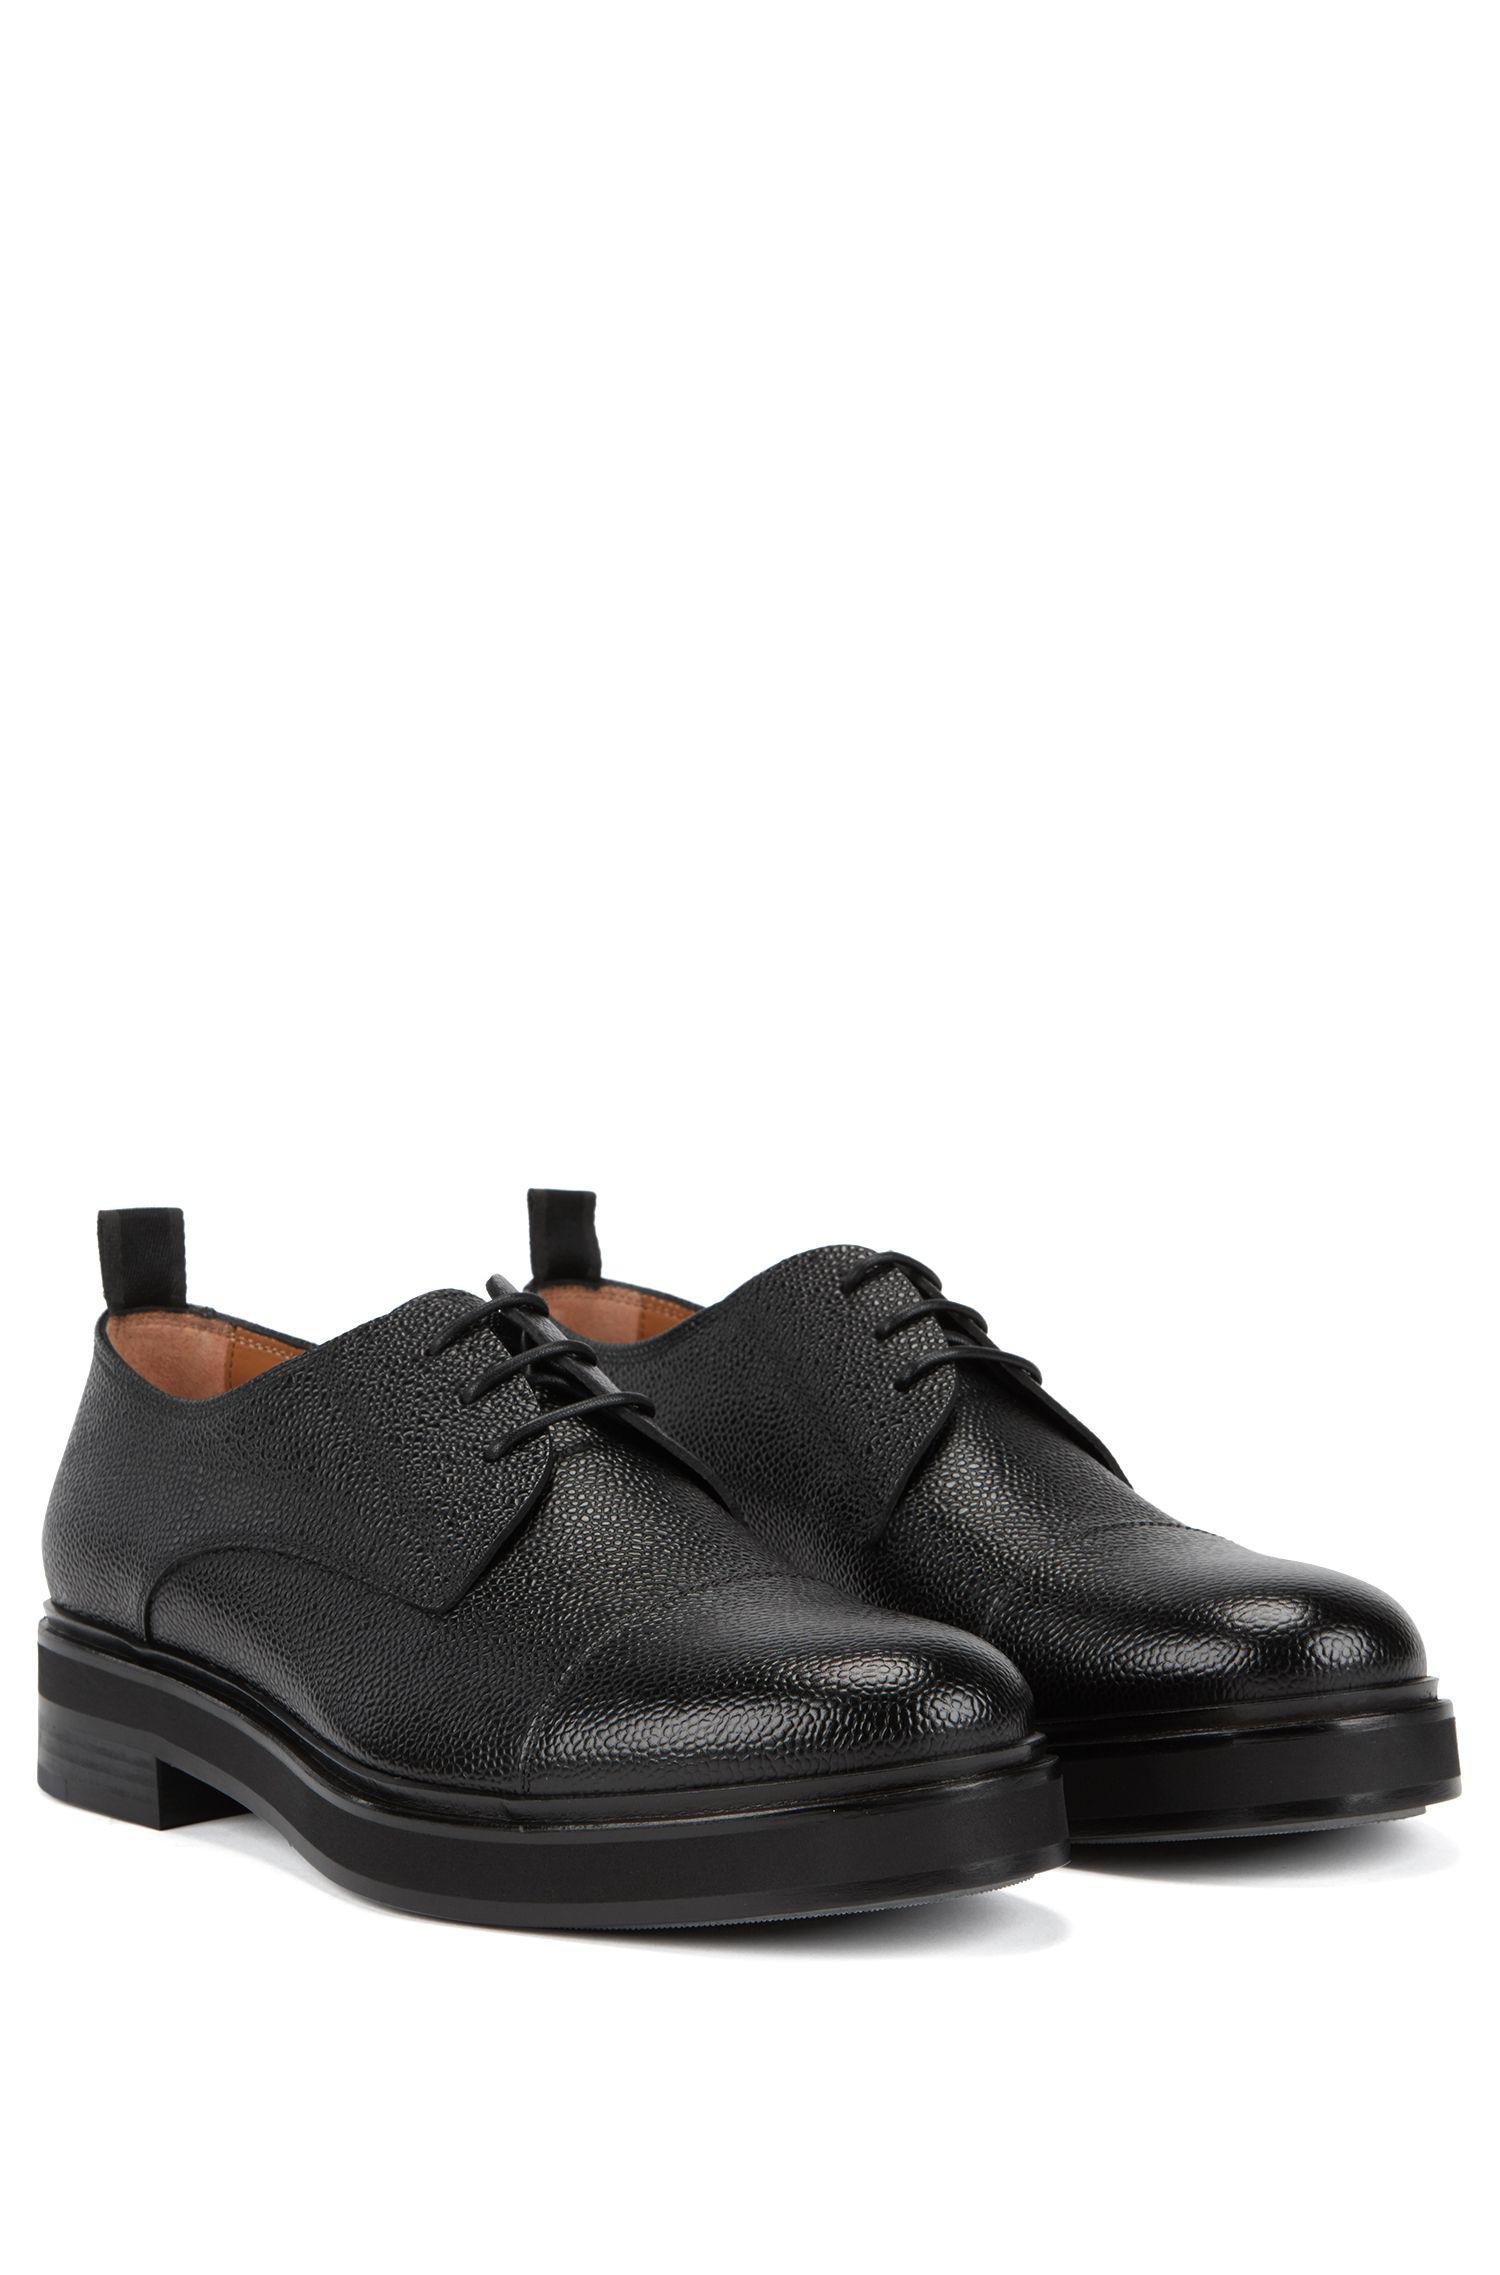 BOSS Italian-made Derby Shoes In Grainy Scotch Leather in Black for Men ...